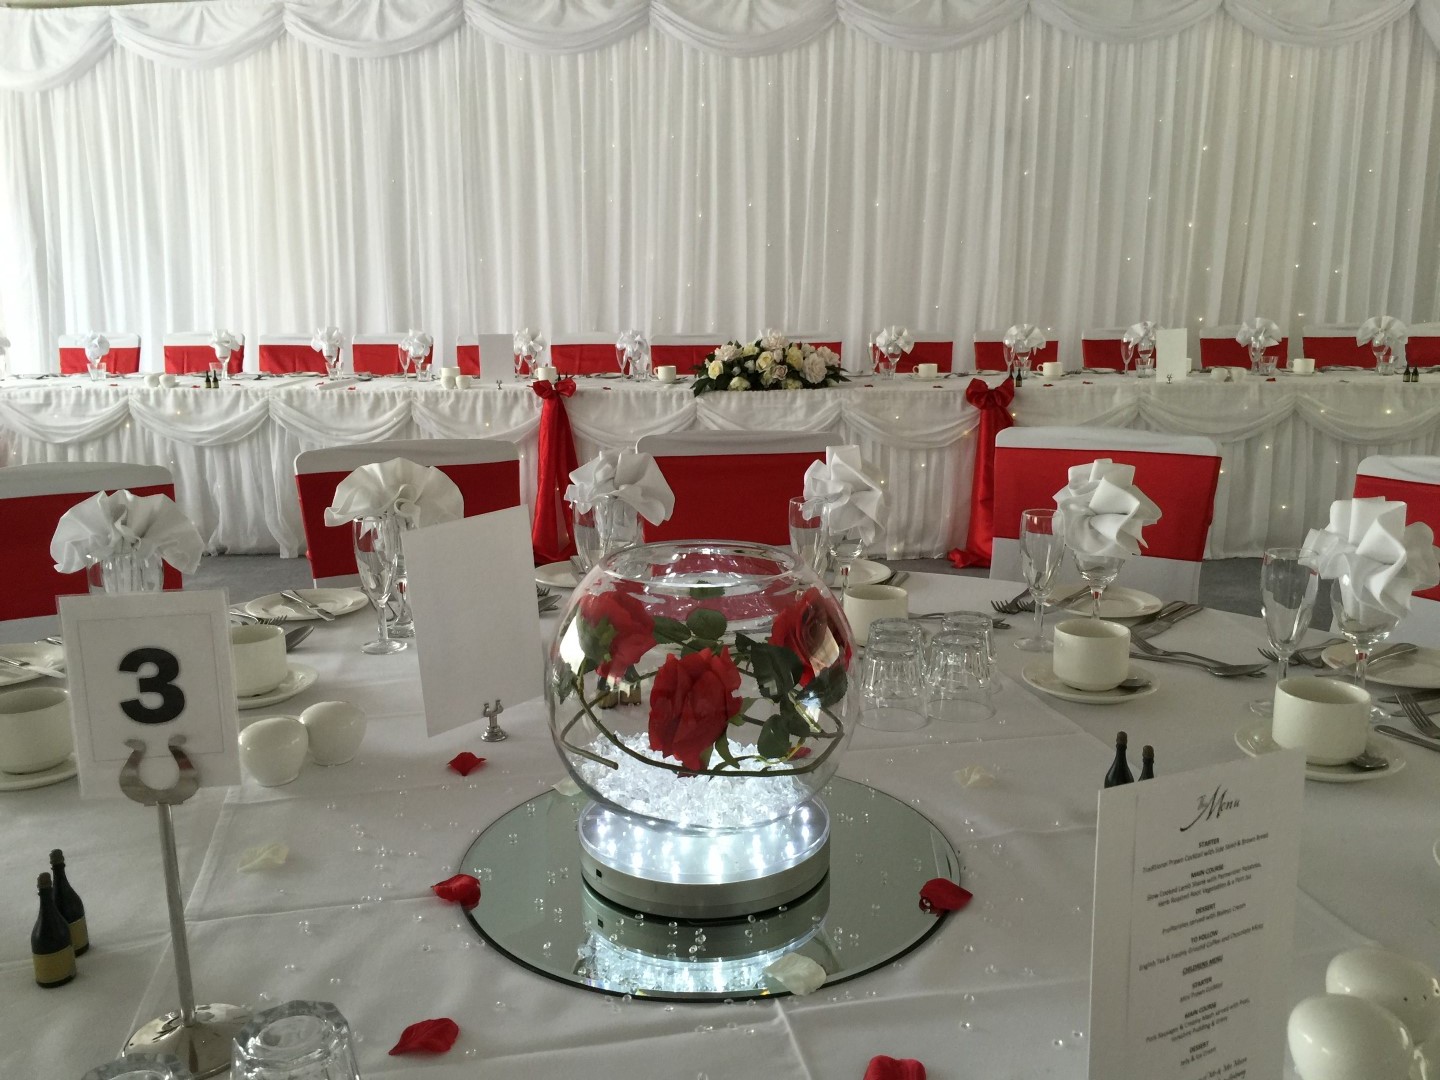 Lush Occassions Chair Covers, Sashes and Centrepieces